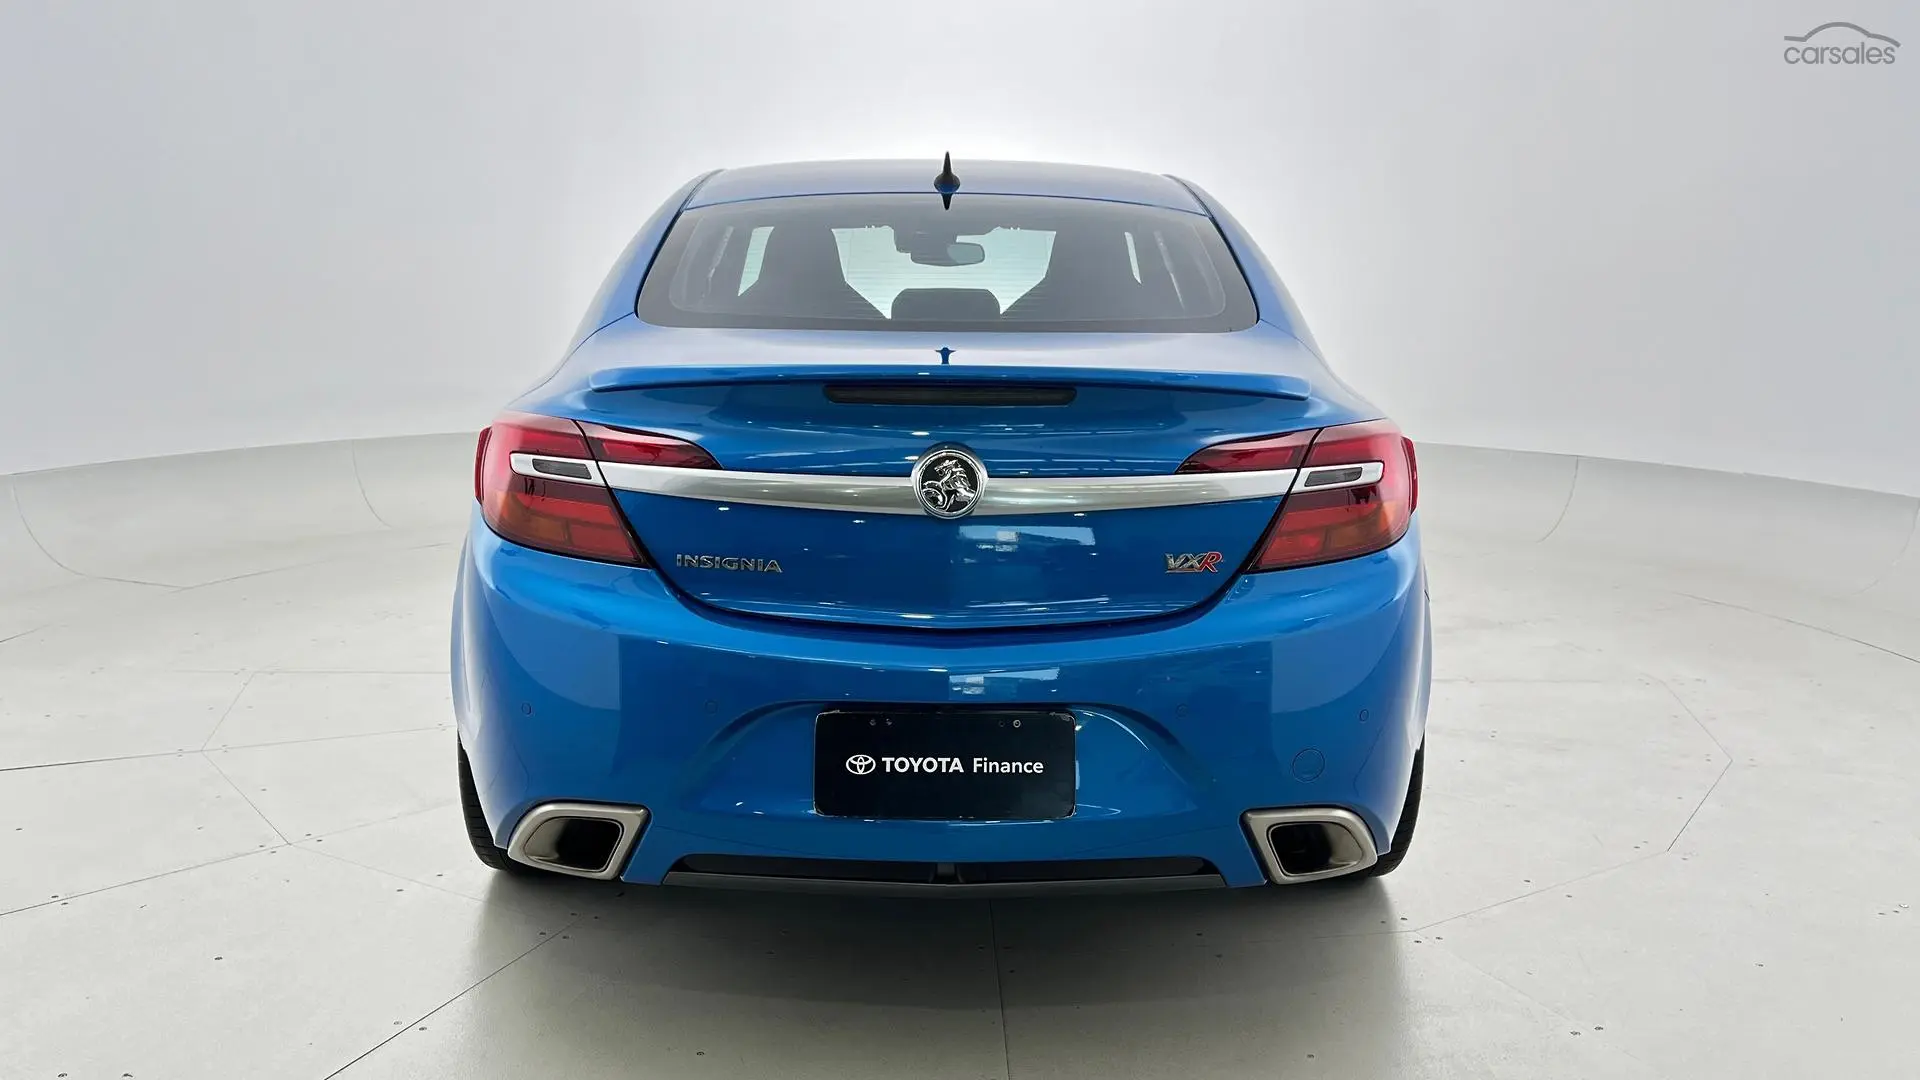 2015 Holden Insignia Image 6